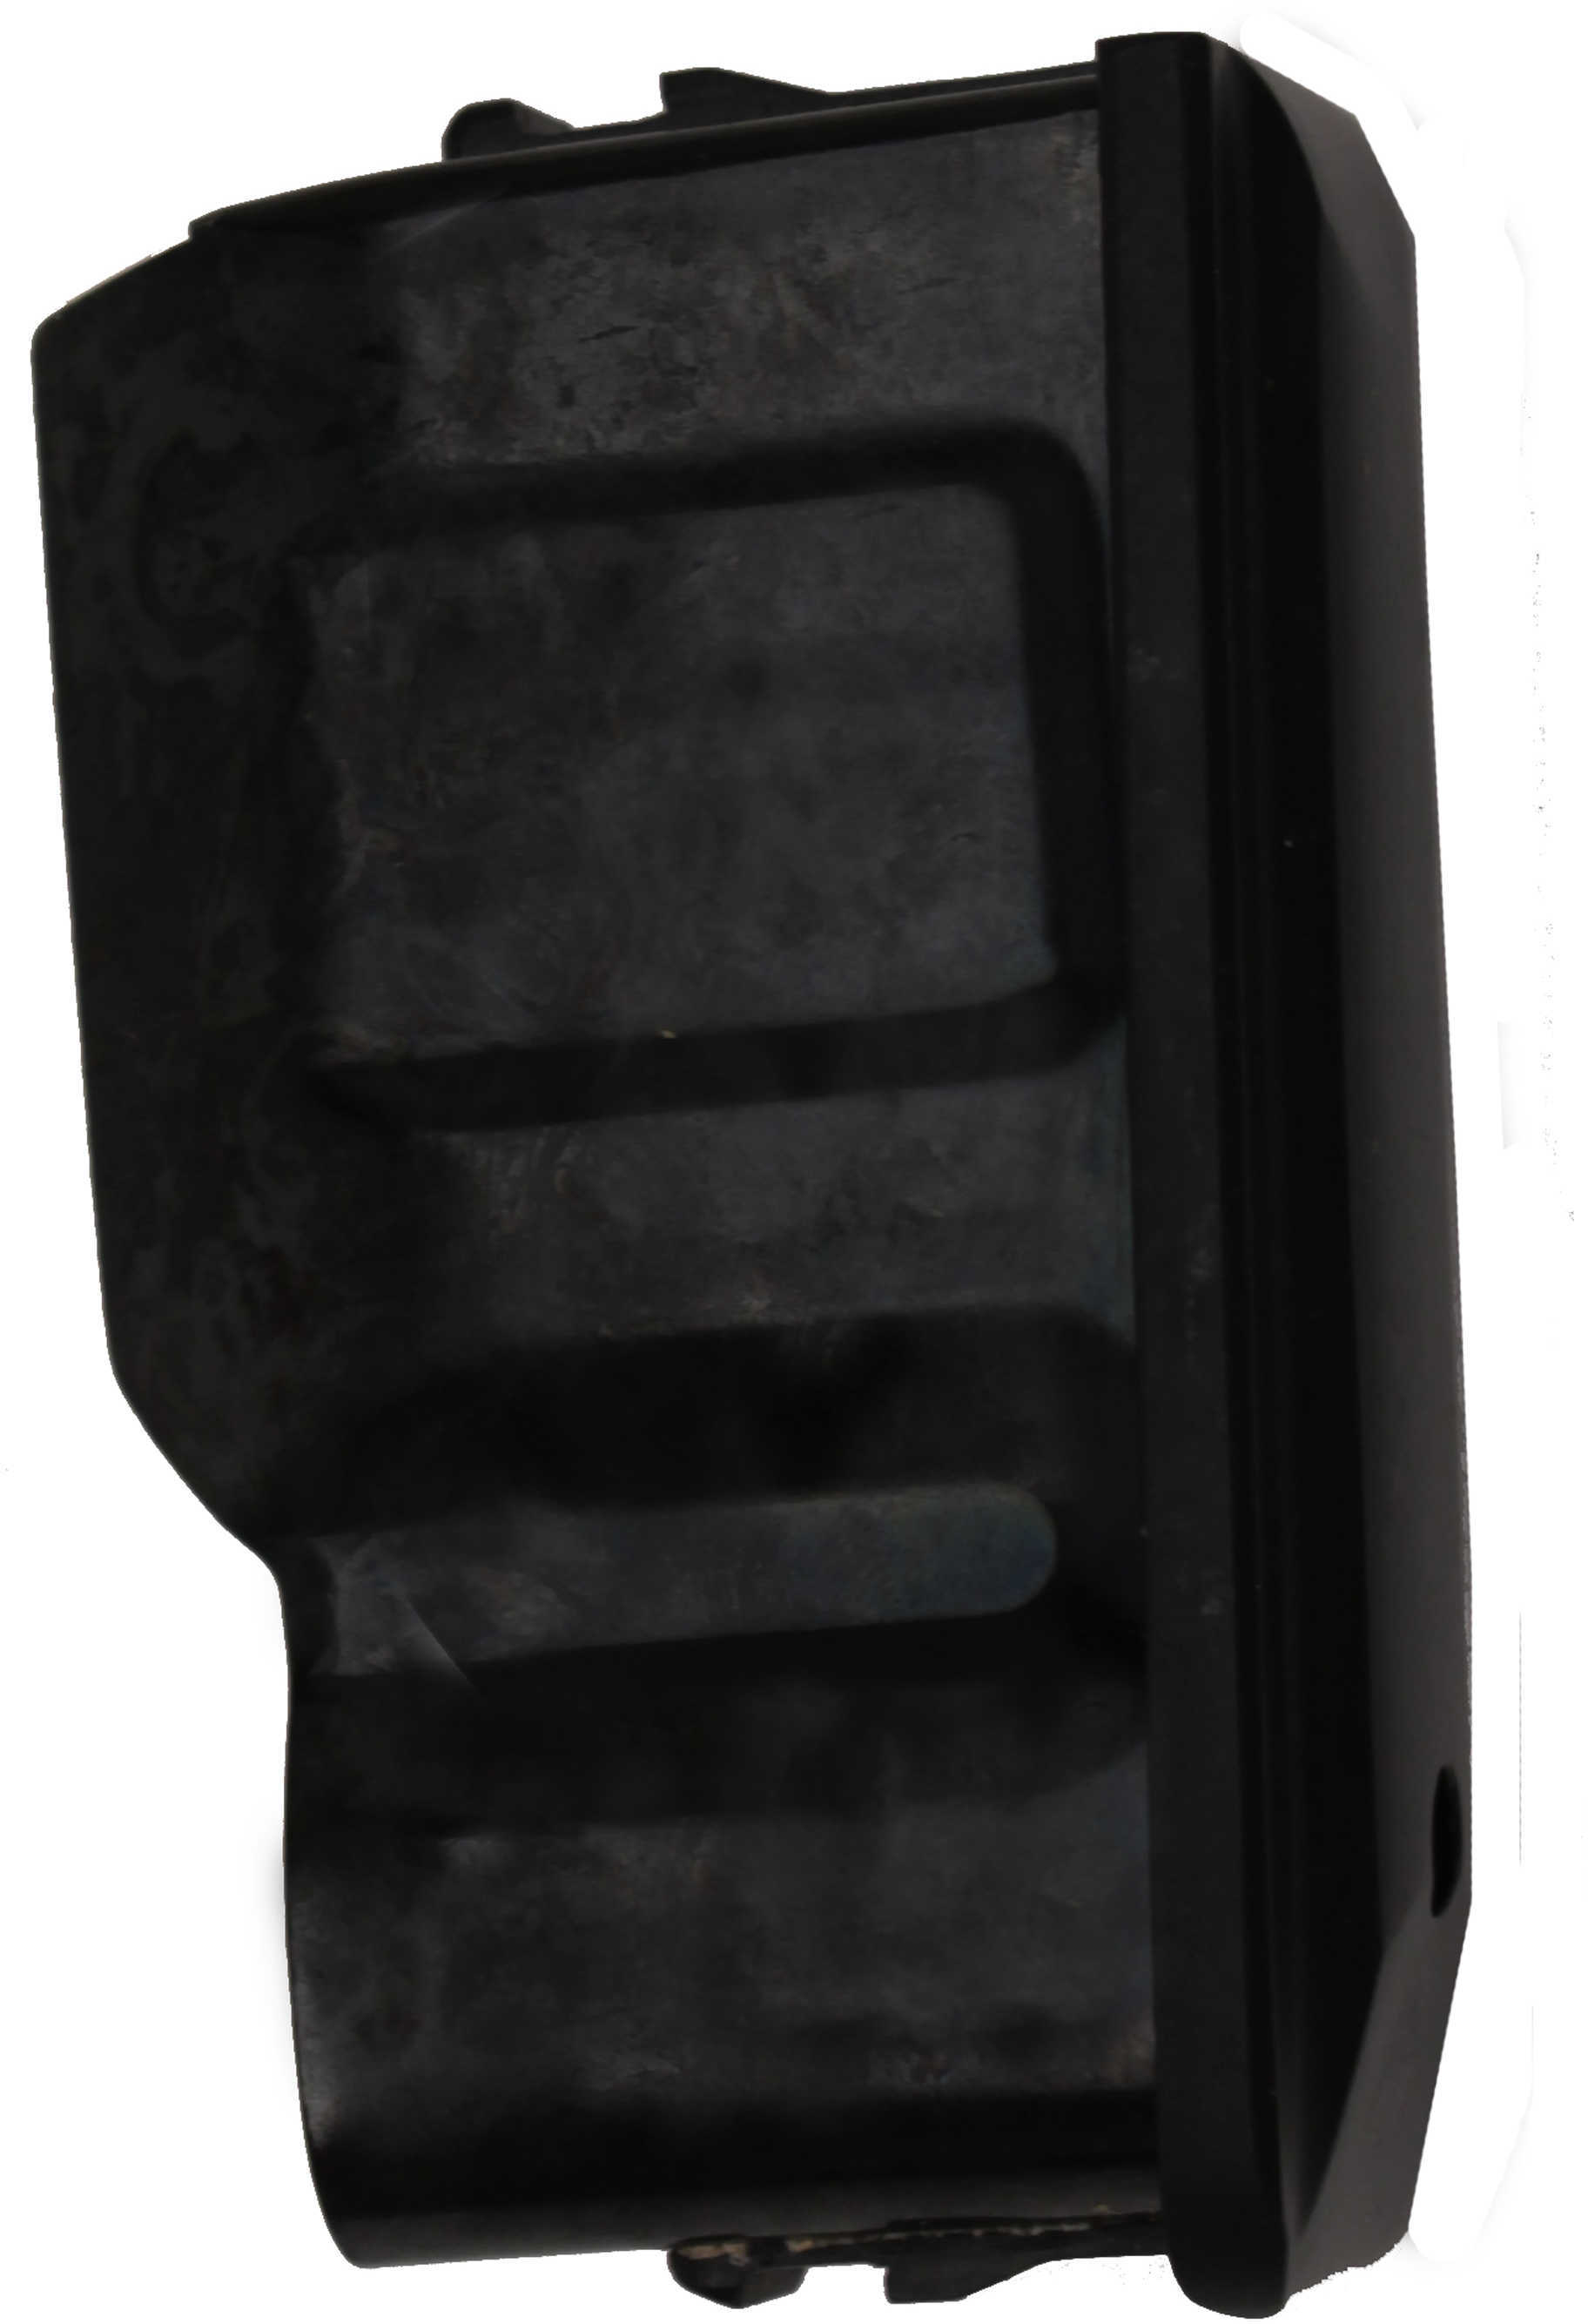 CZ USA 4 Round 243 Winchester Model 550 Magazine With Steel Finish Md: 14001